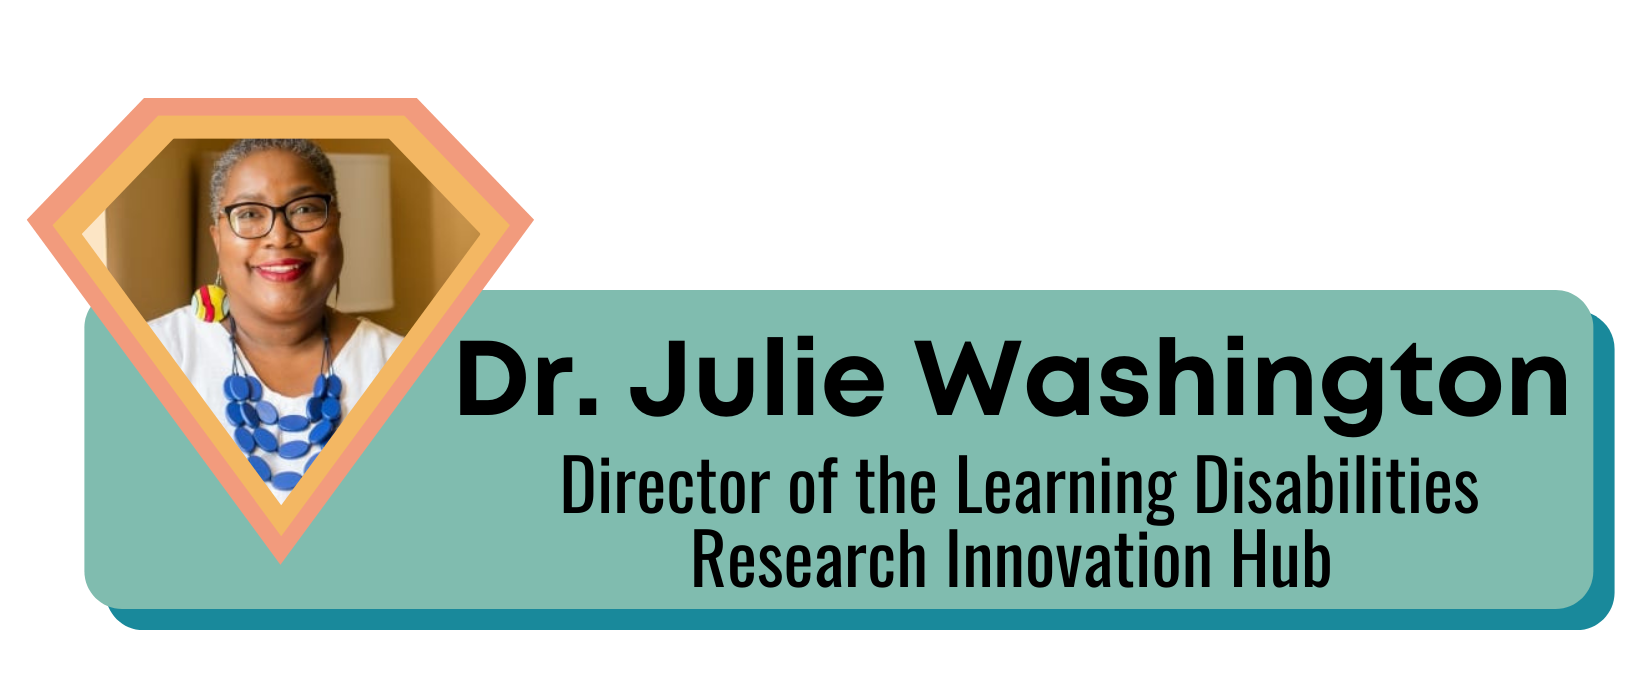 Dr. Julie Washington, Director of Learning Disabilities Research Innovation Hub